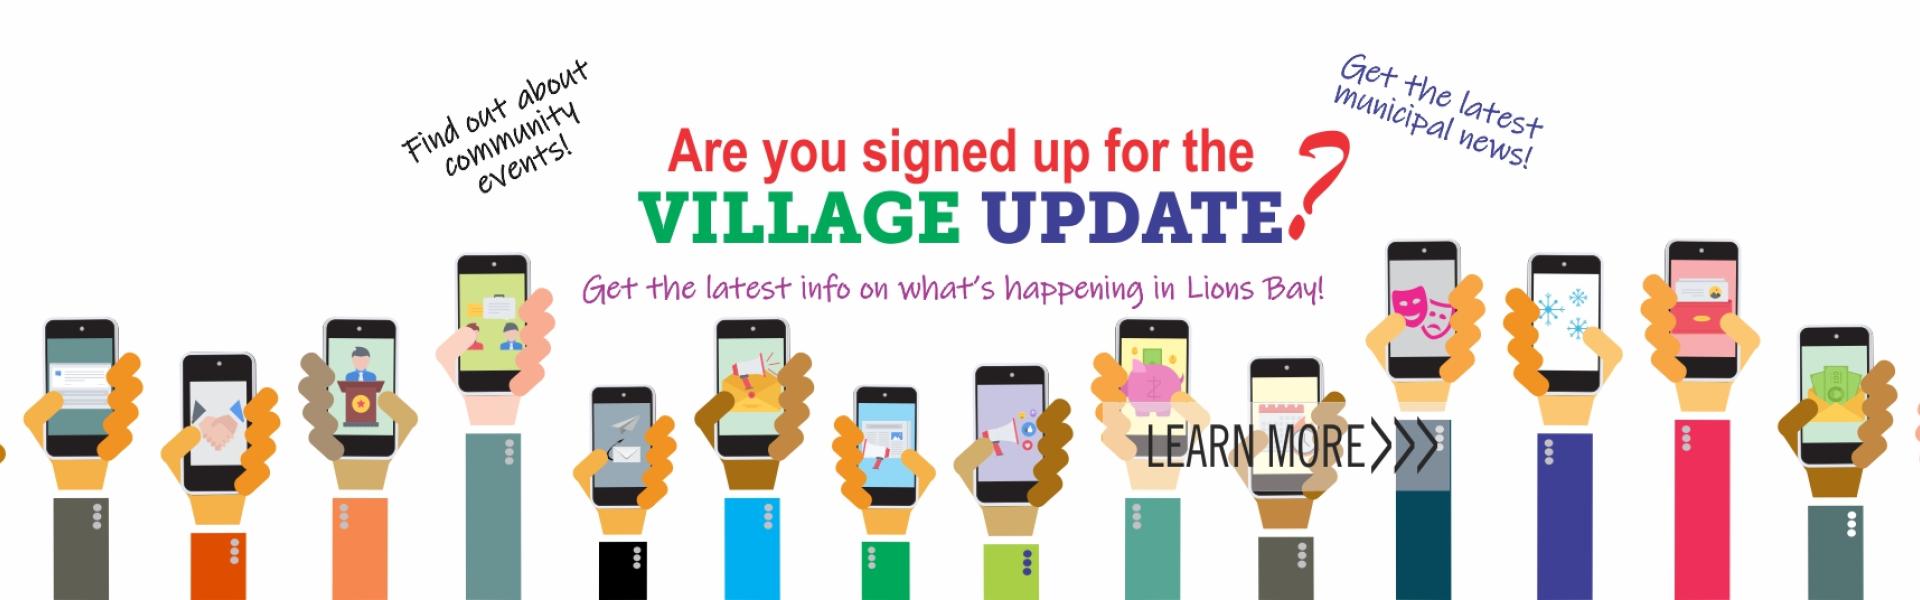 Are you signed up for the Village Update?